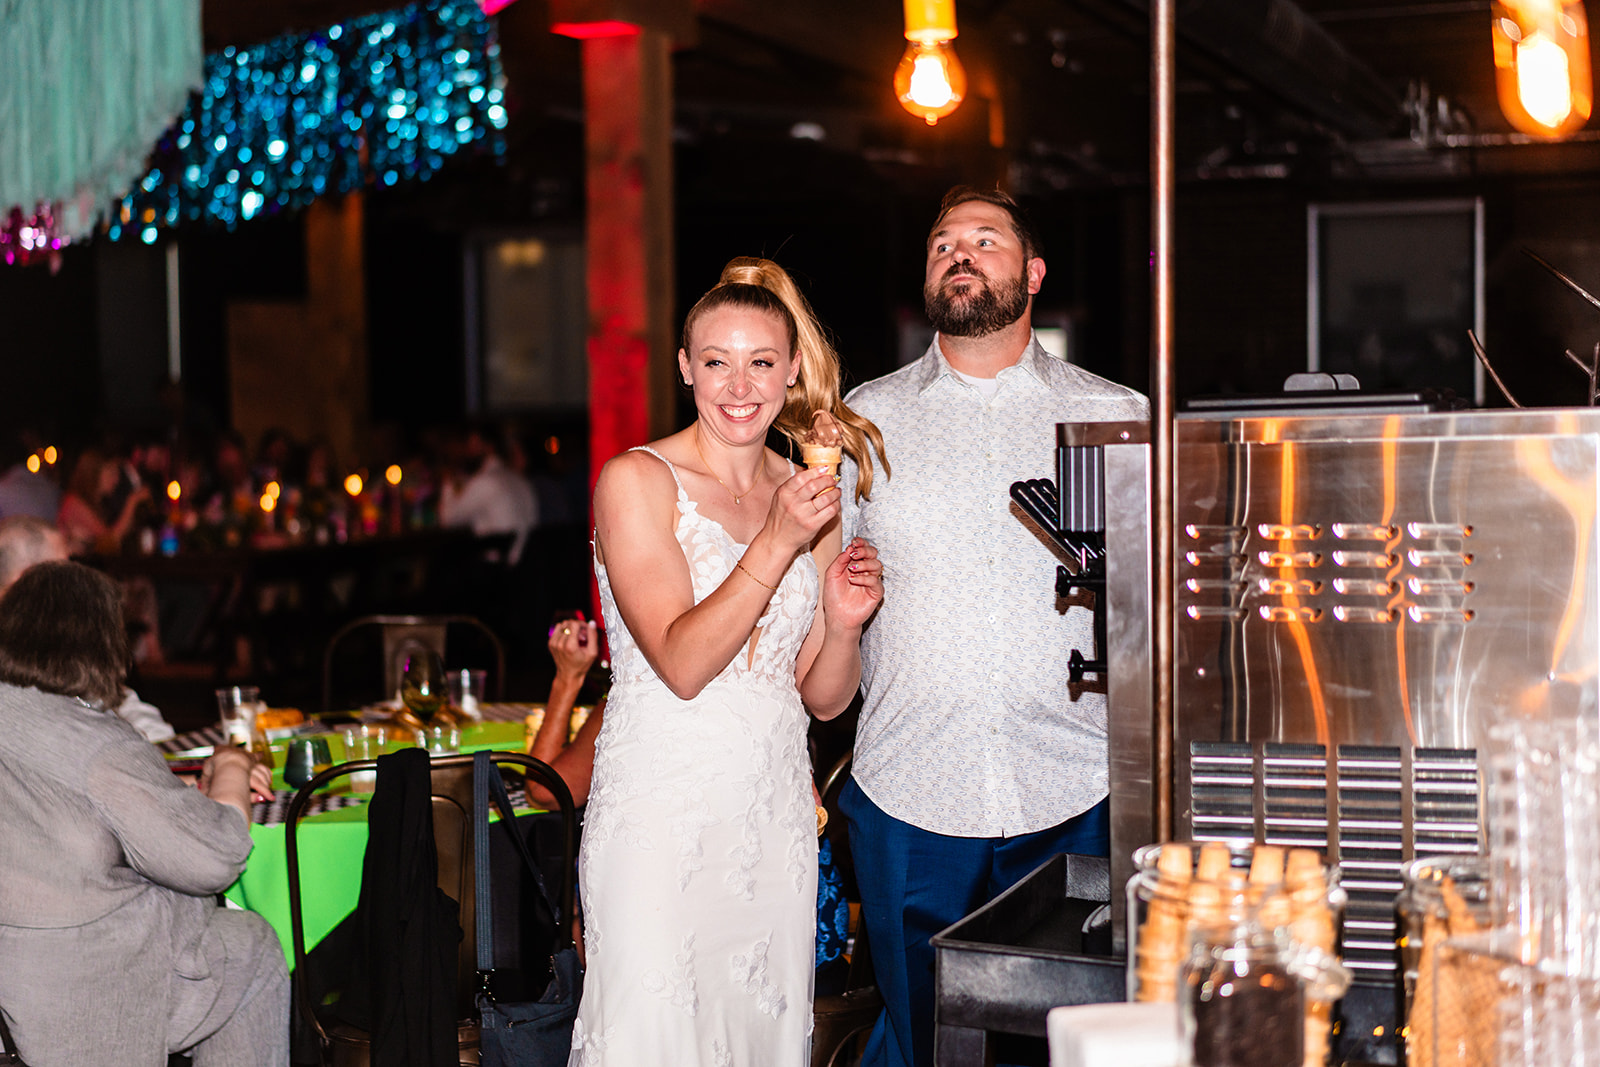 Bride and groom feeding each other ice cream during their elopement and wedding reception